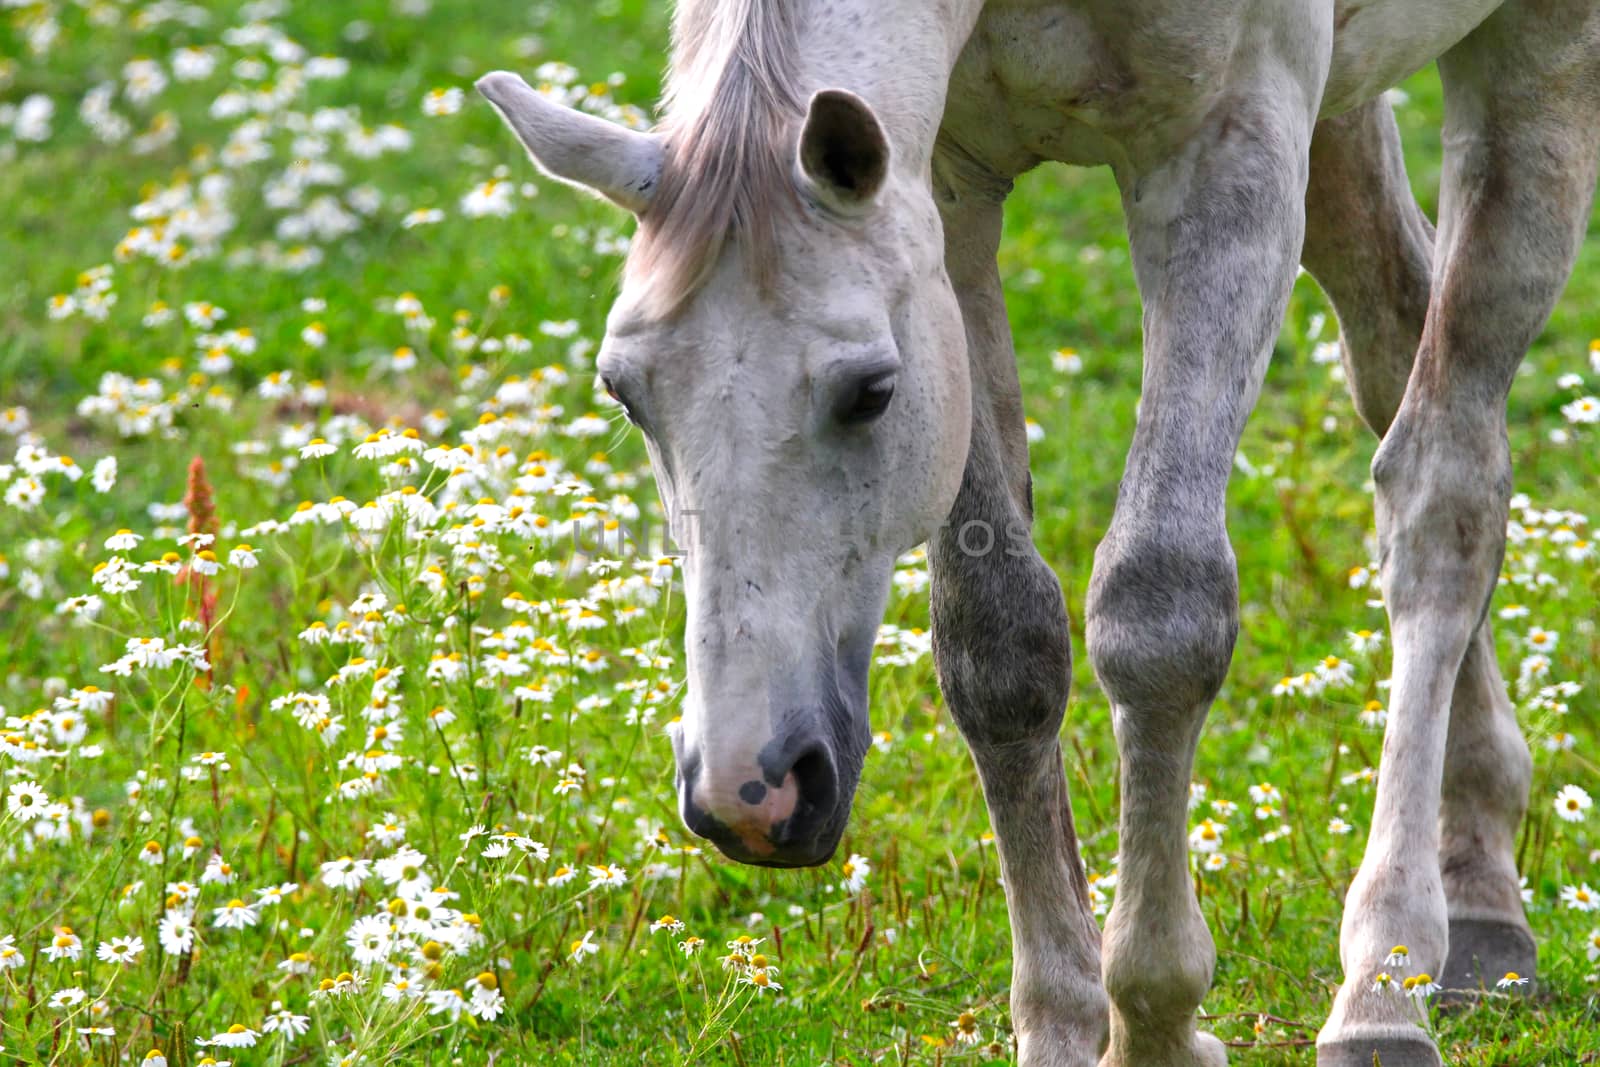 A white horse portrait with fresh green grass and white flowers.